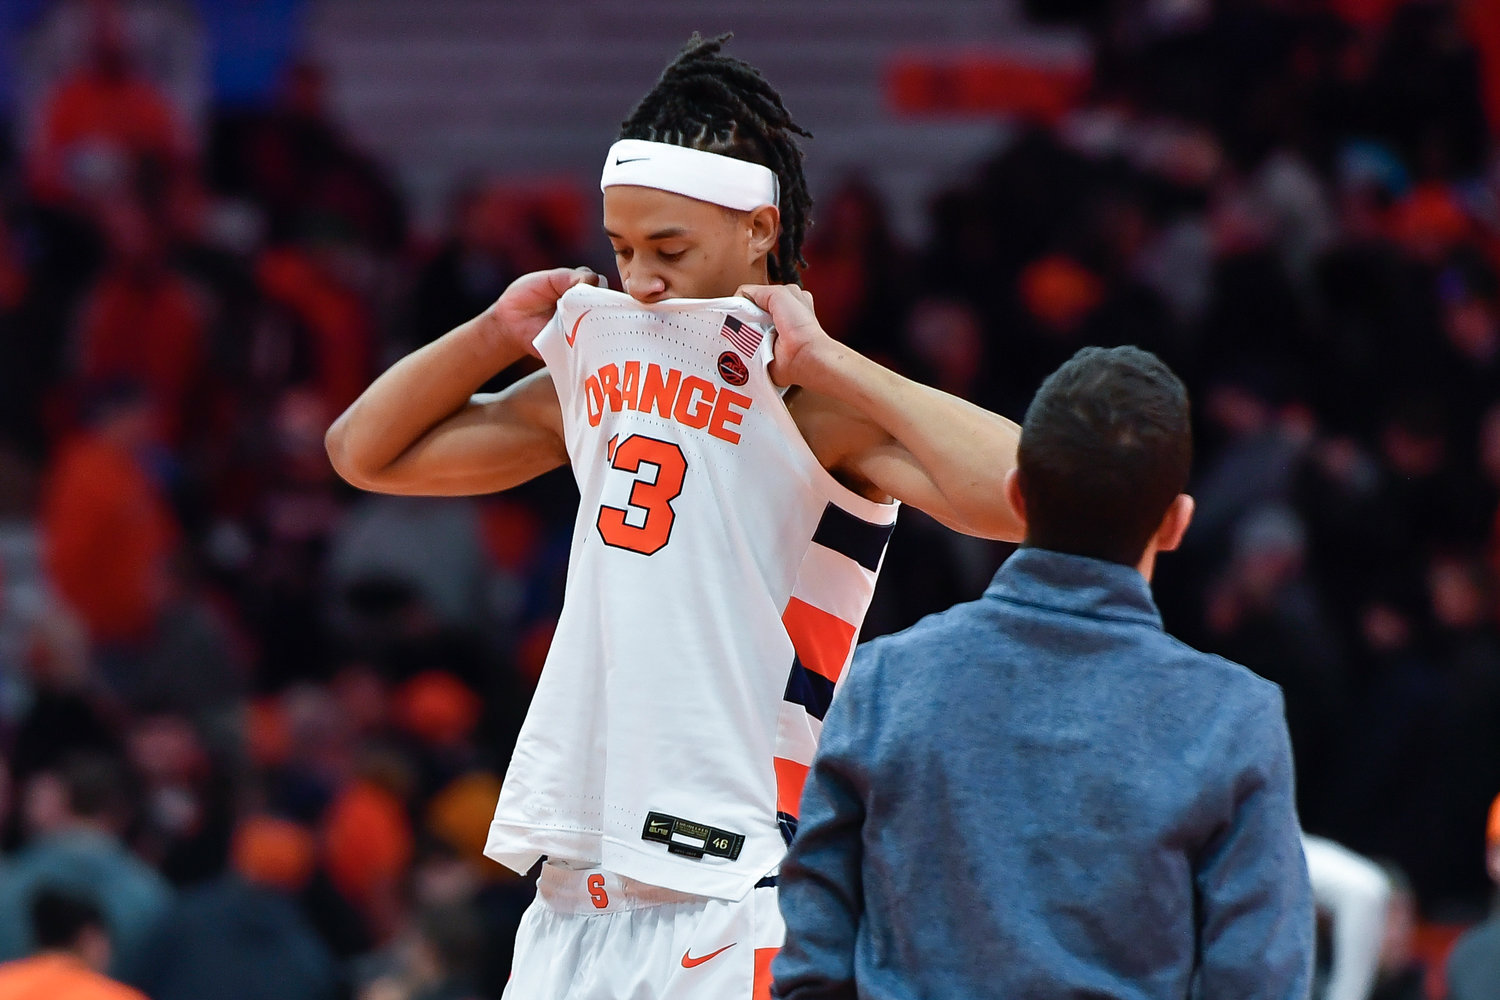 Syracuse forward Benny Williams walks off the court after the team's 72-68 loss to North Carolina on Tuesday night at the JMA Wireless Dome in Syracuse.